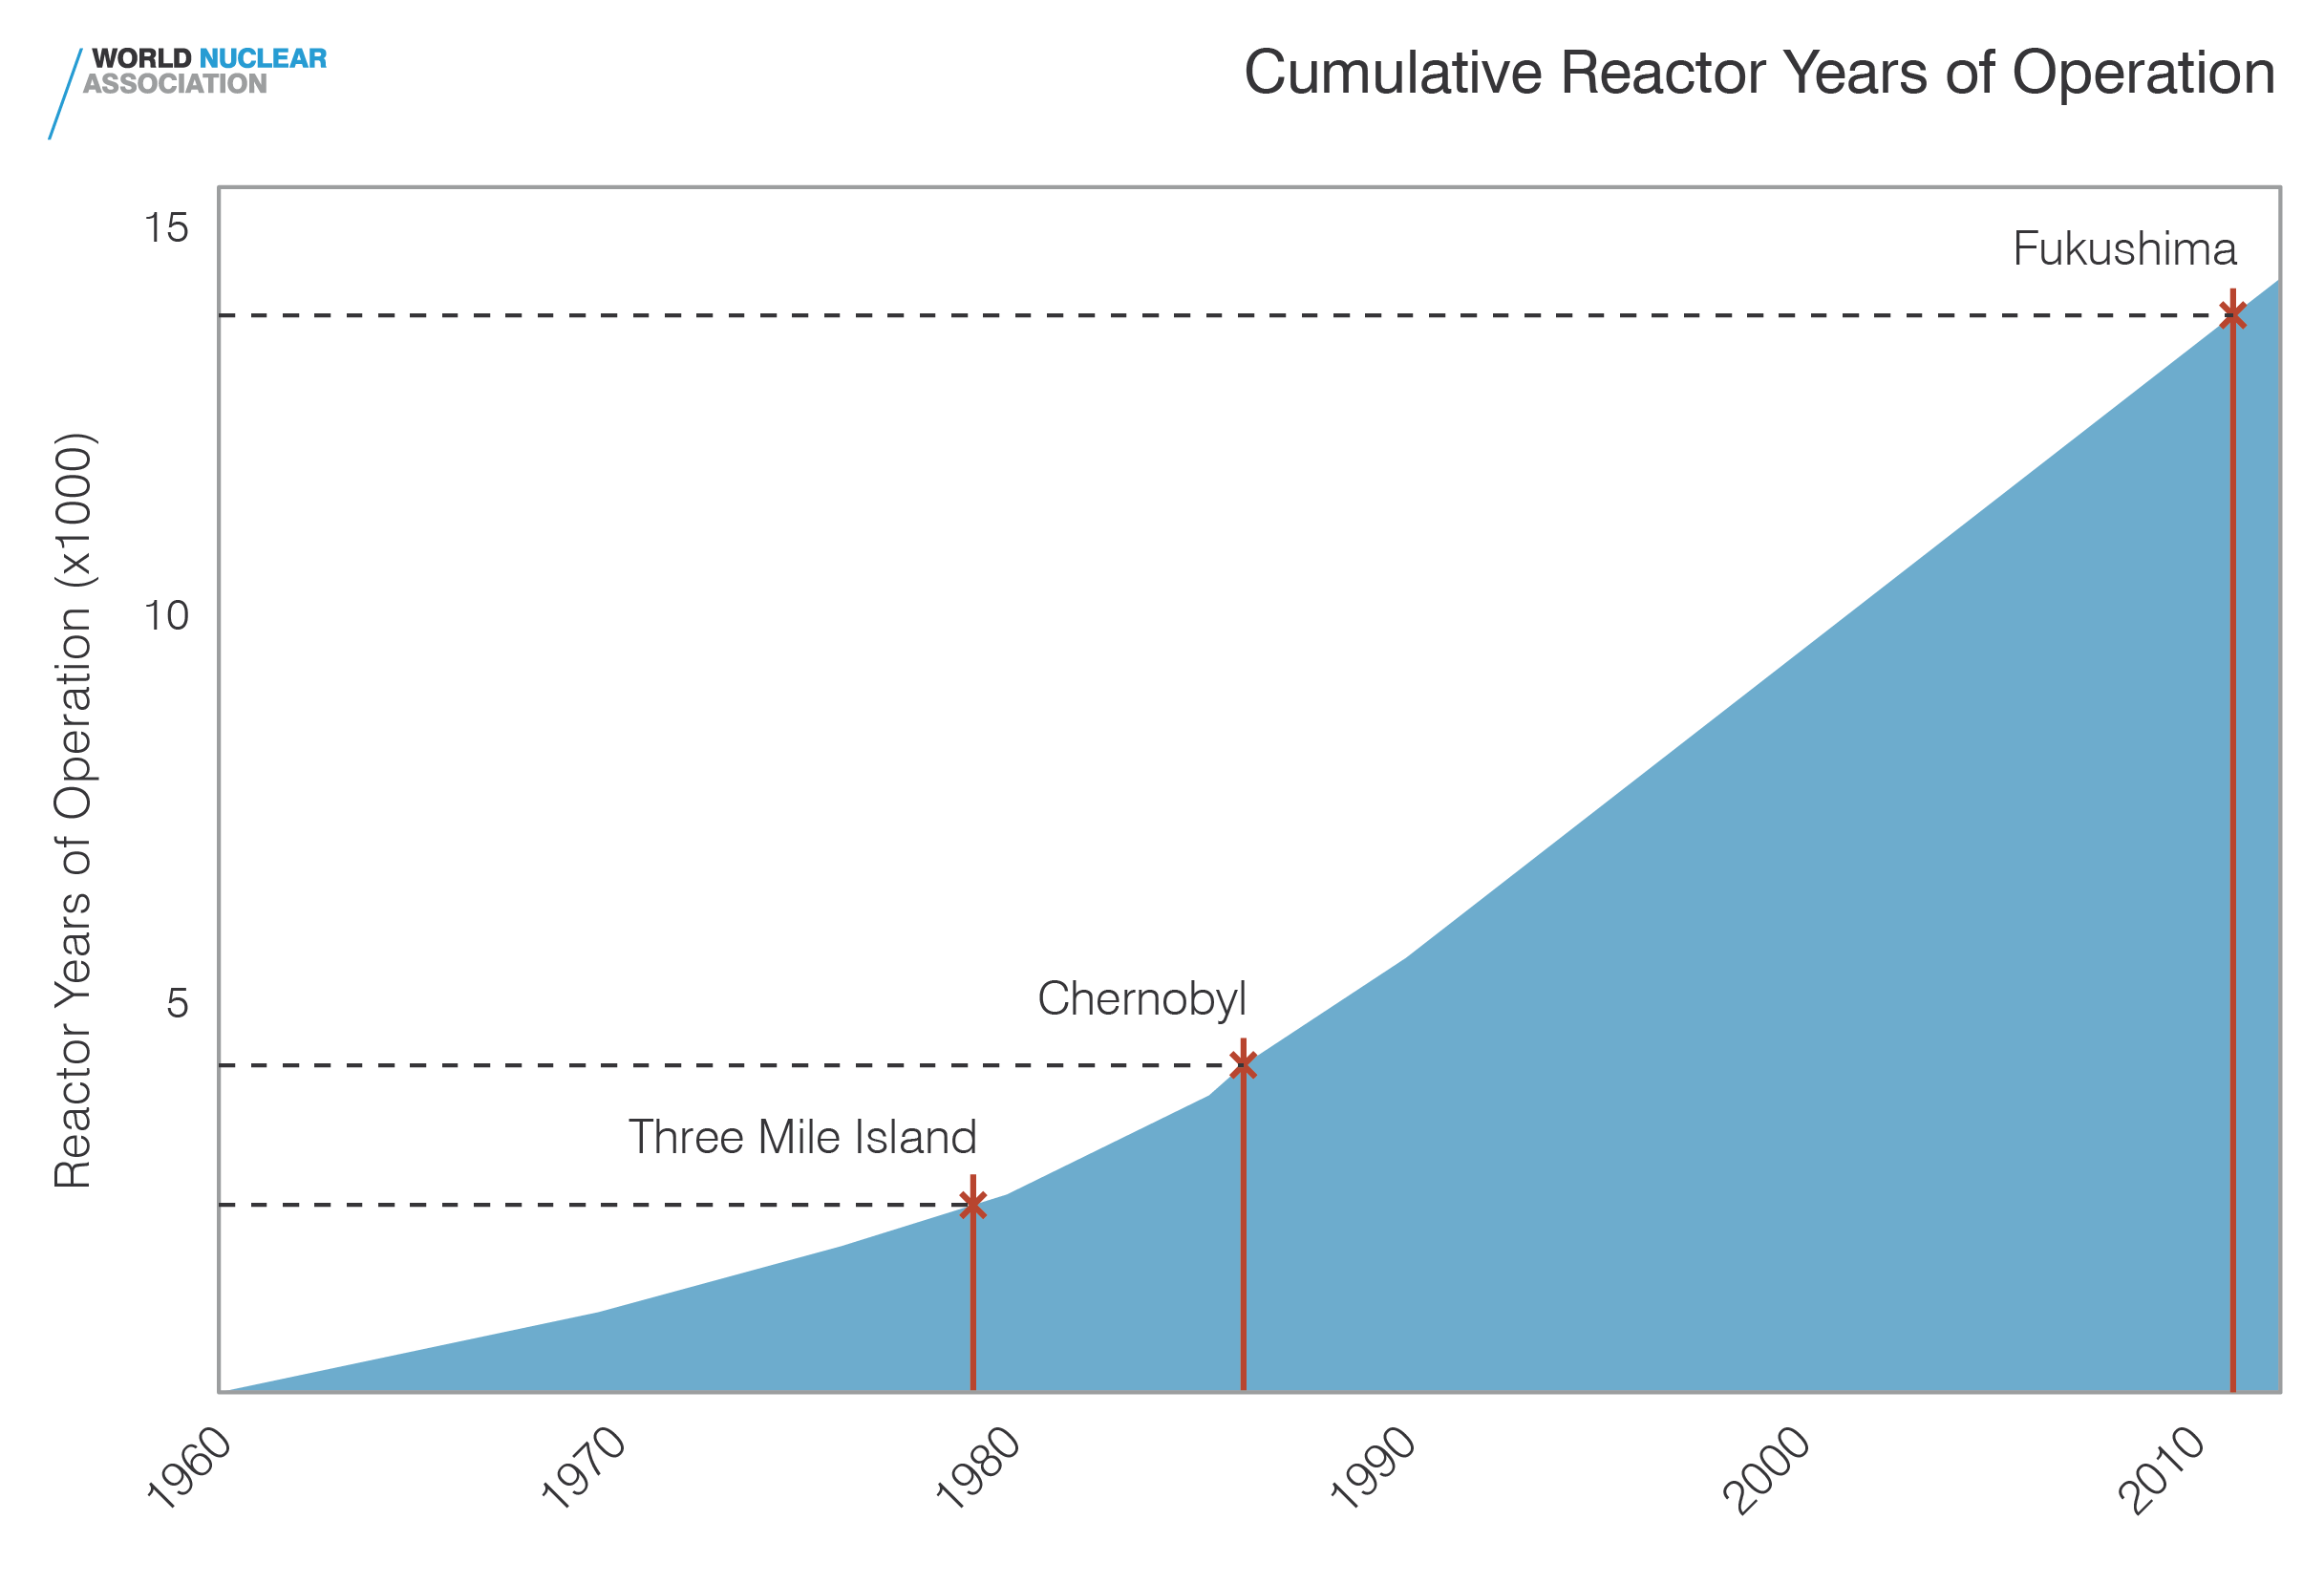 Cumulative reactor years of operation